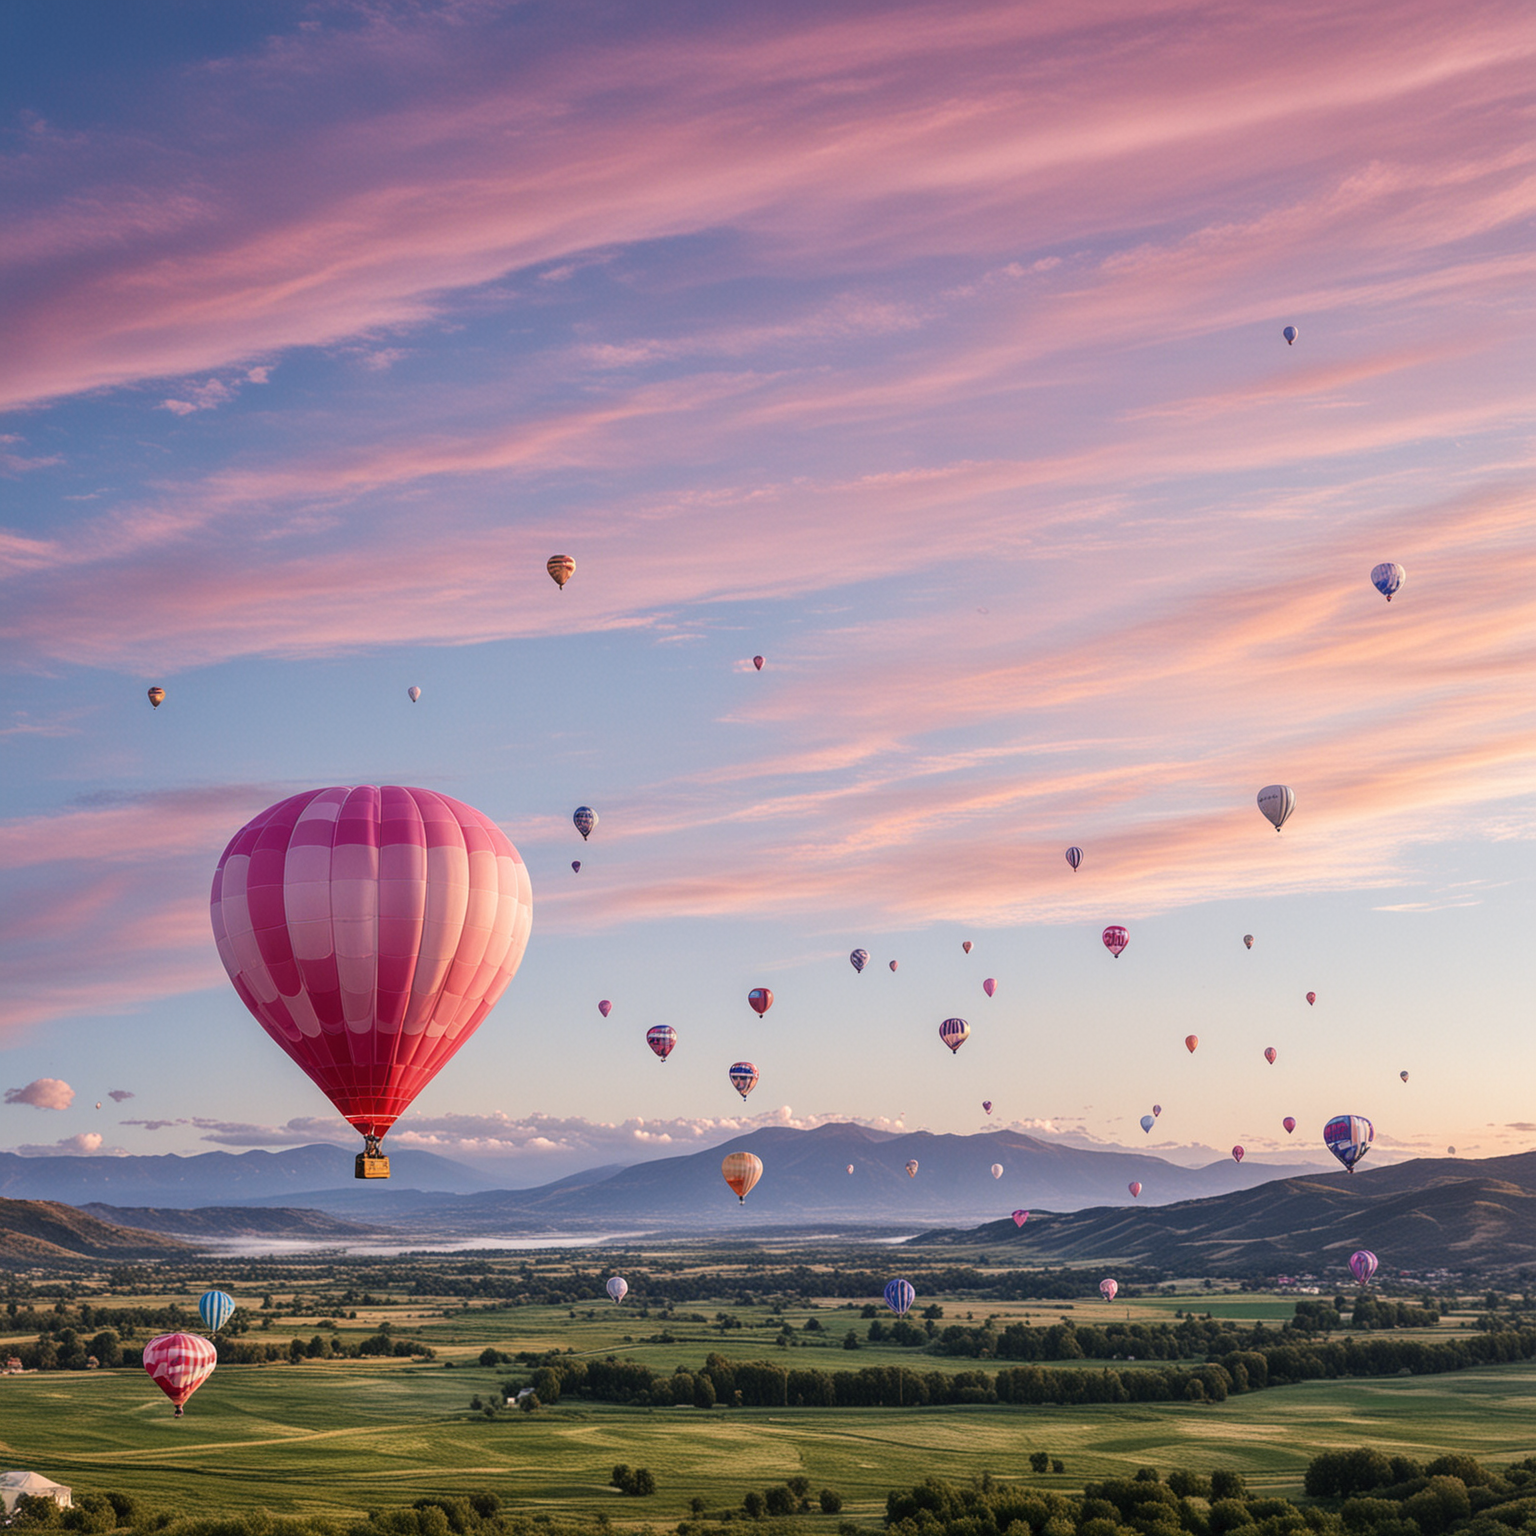 Hot air balloon comprised of lots of small pink and white ballons, the pink balloons in different shades of pink. A bright blue sky and some white streamed clouds in the background, and green grass hills below 